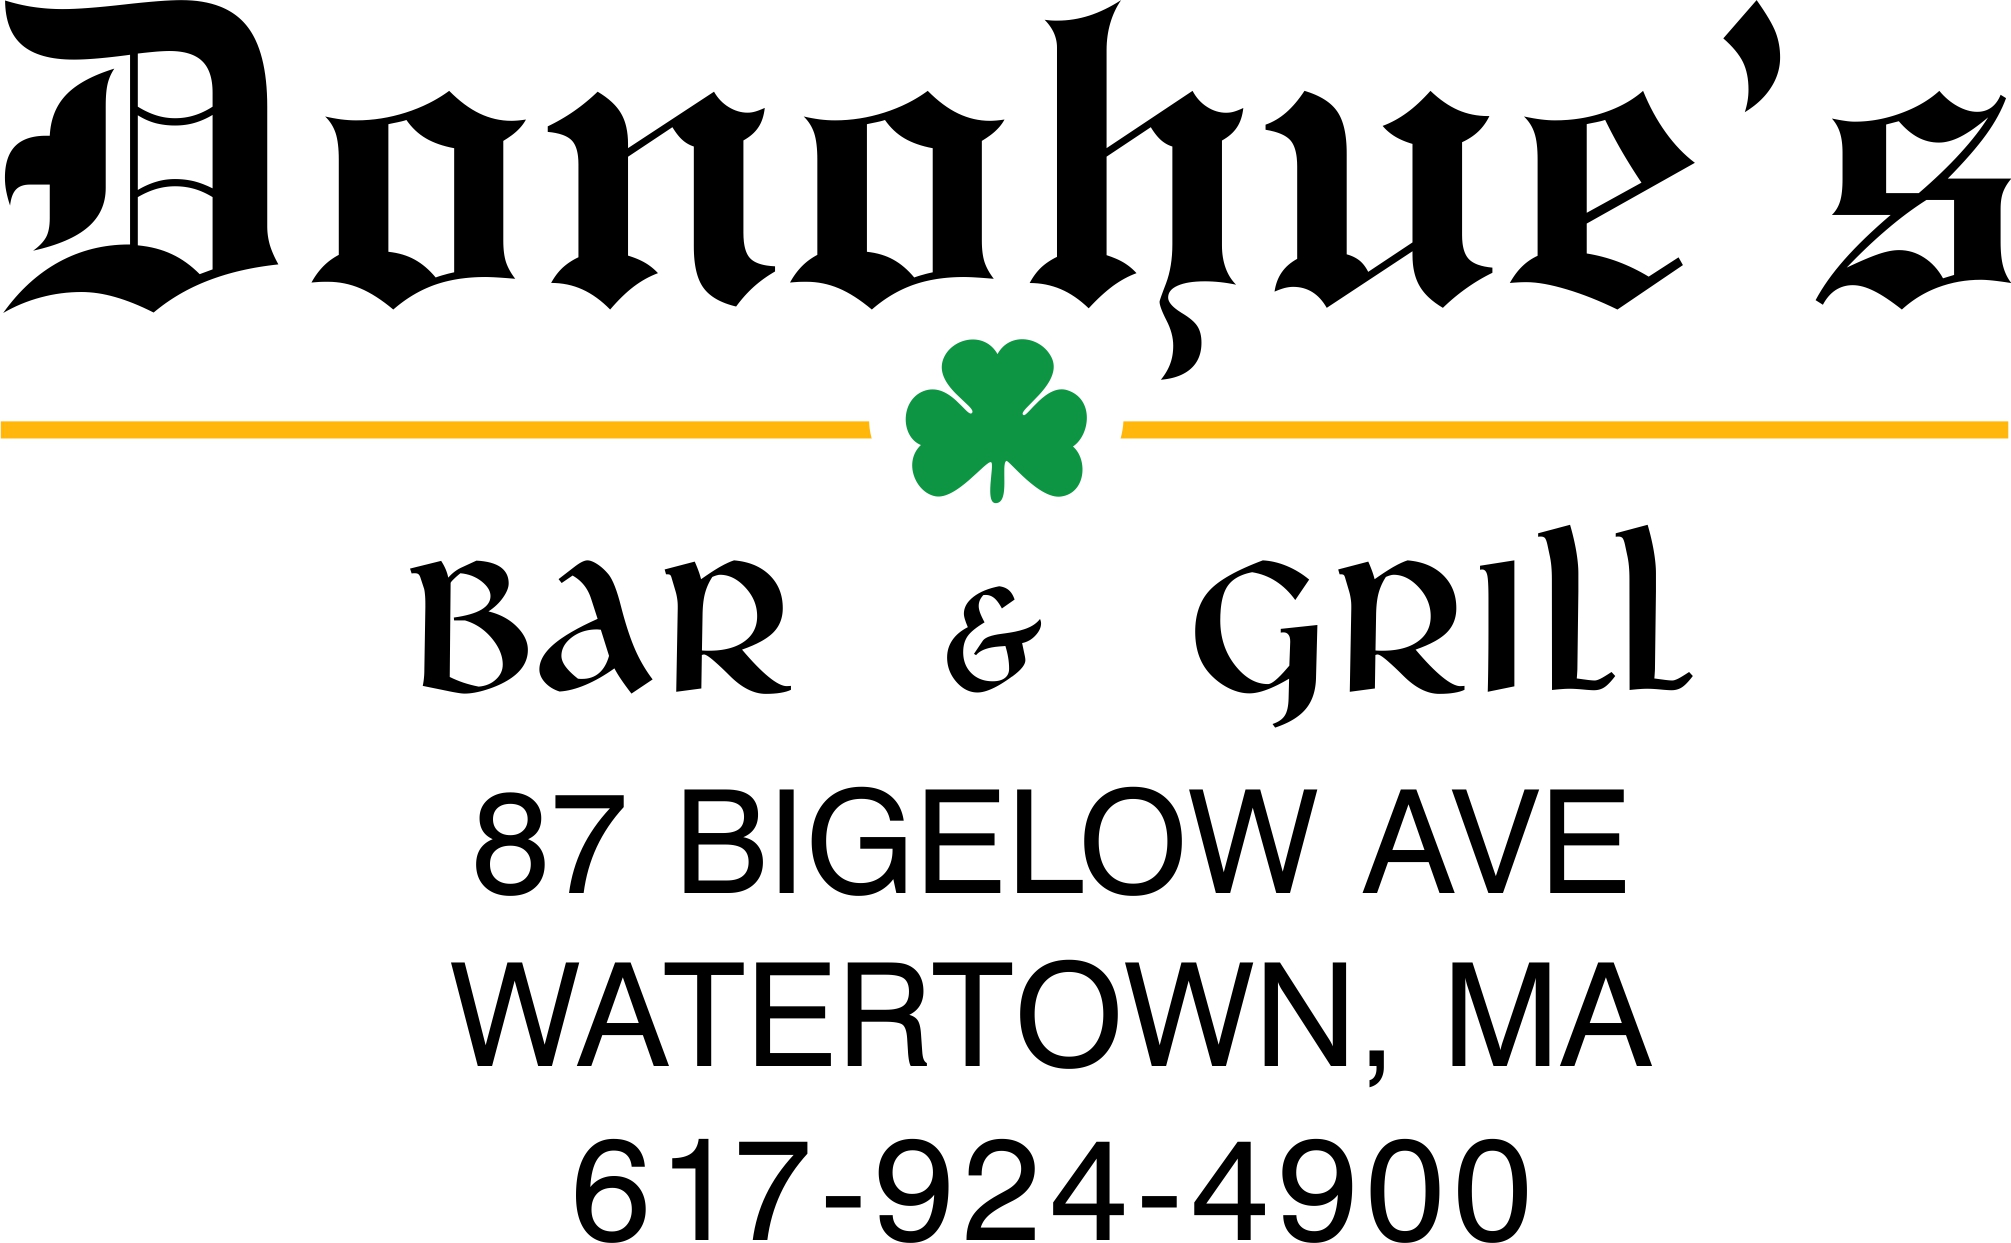 Donohue's Bar & Grill Watertown